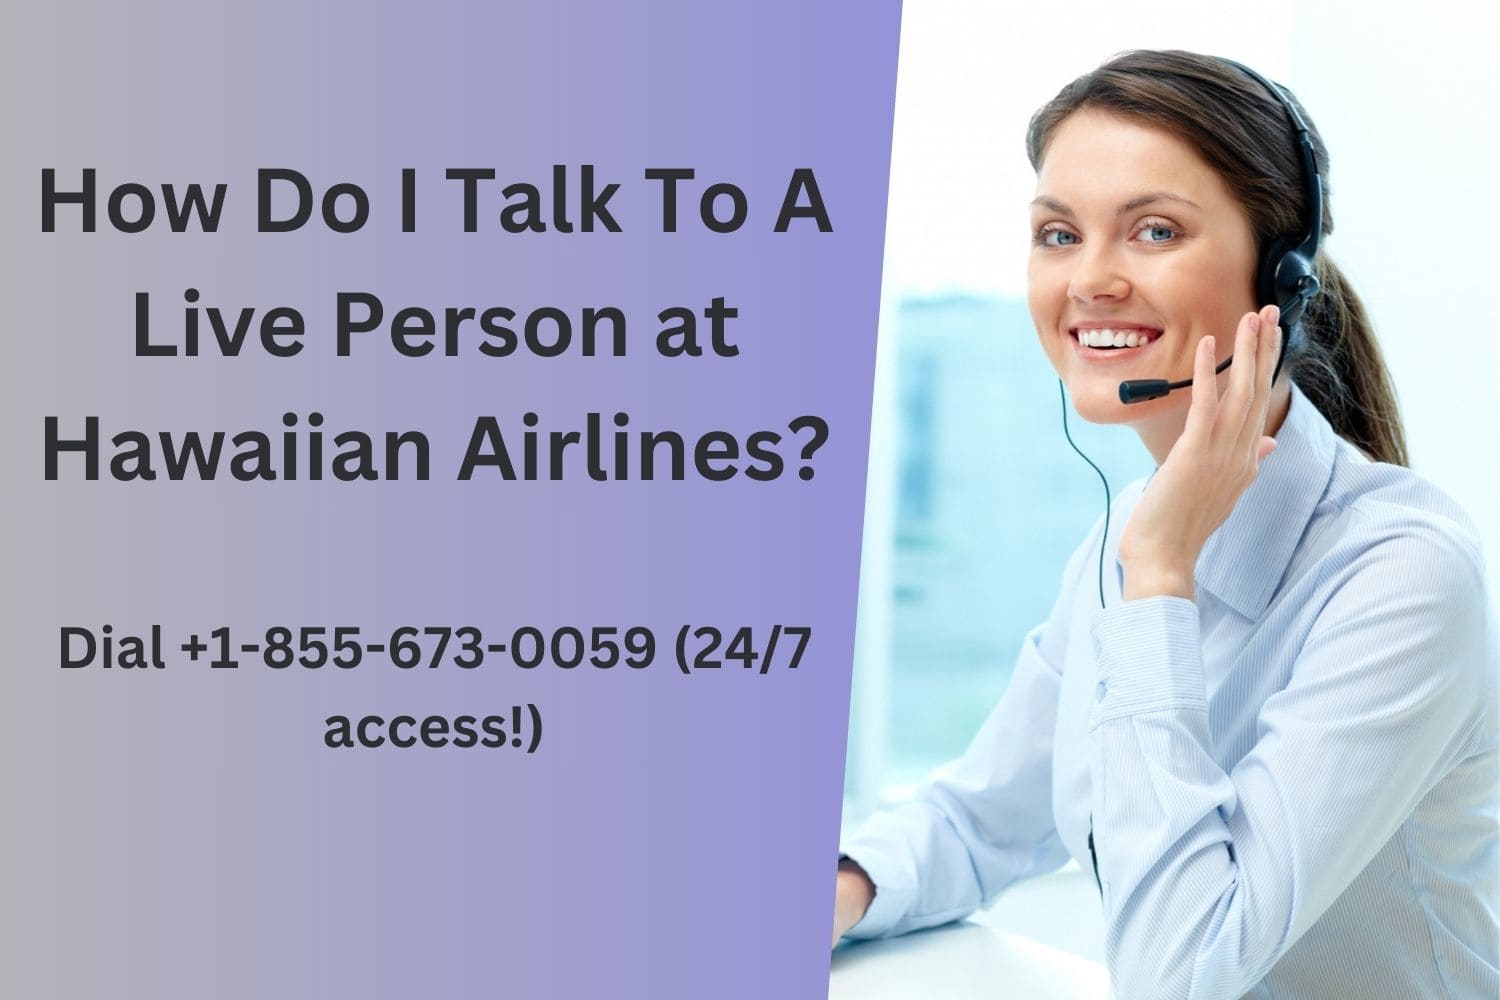 How Do I Talk To A Live Person at Hawaiian Airlines